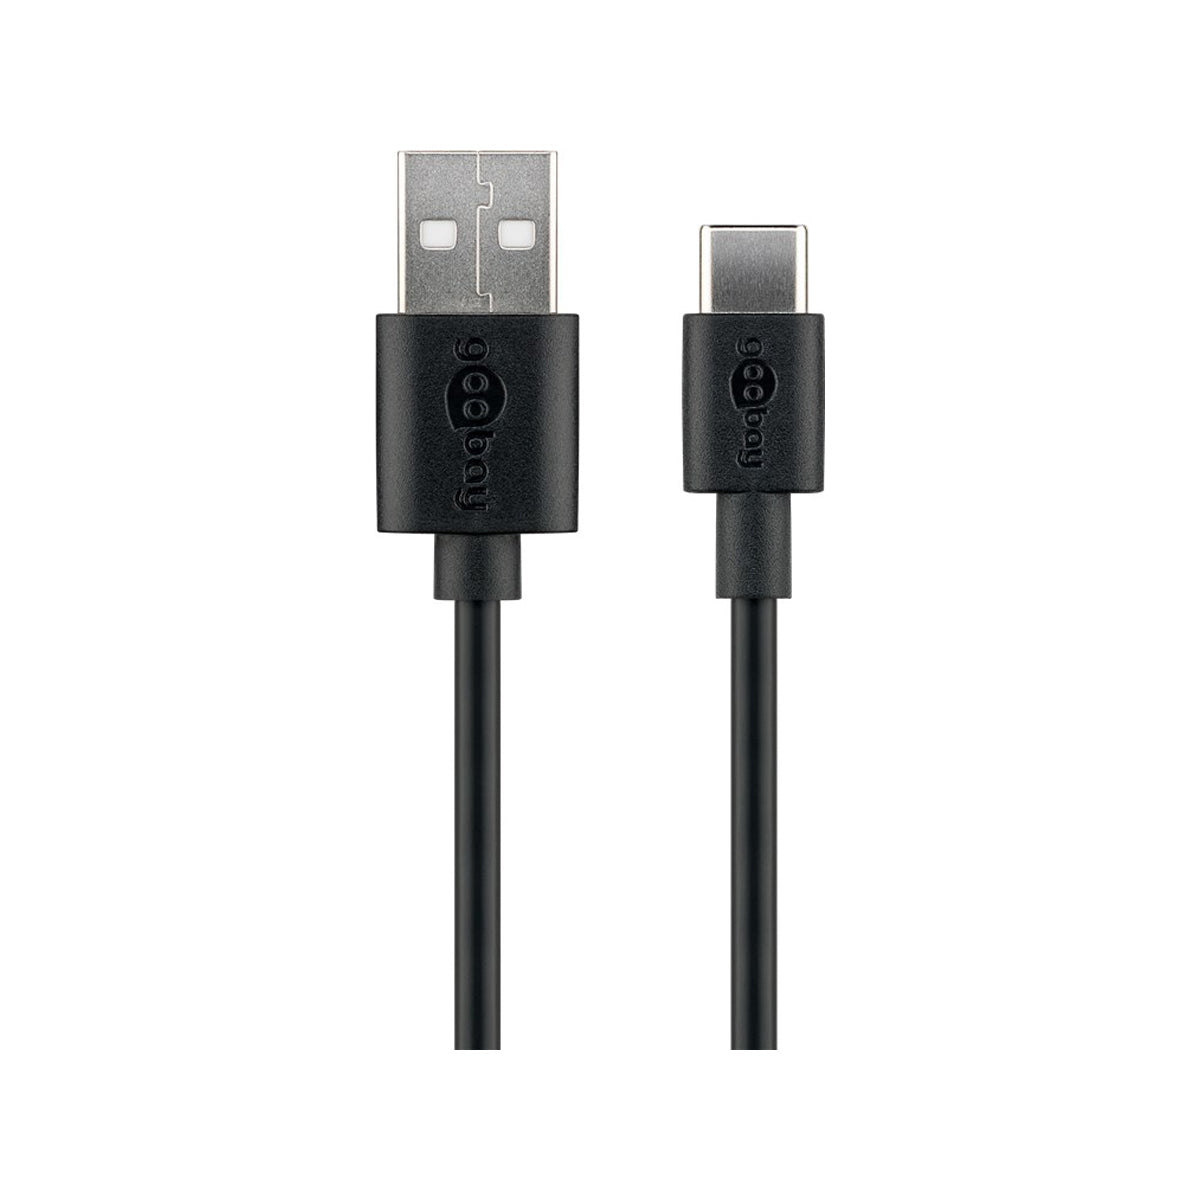 Goobay USB-A to USB-C 2.0 cable 0.1M for Mobiles and Laptops - Black.